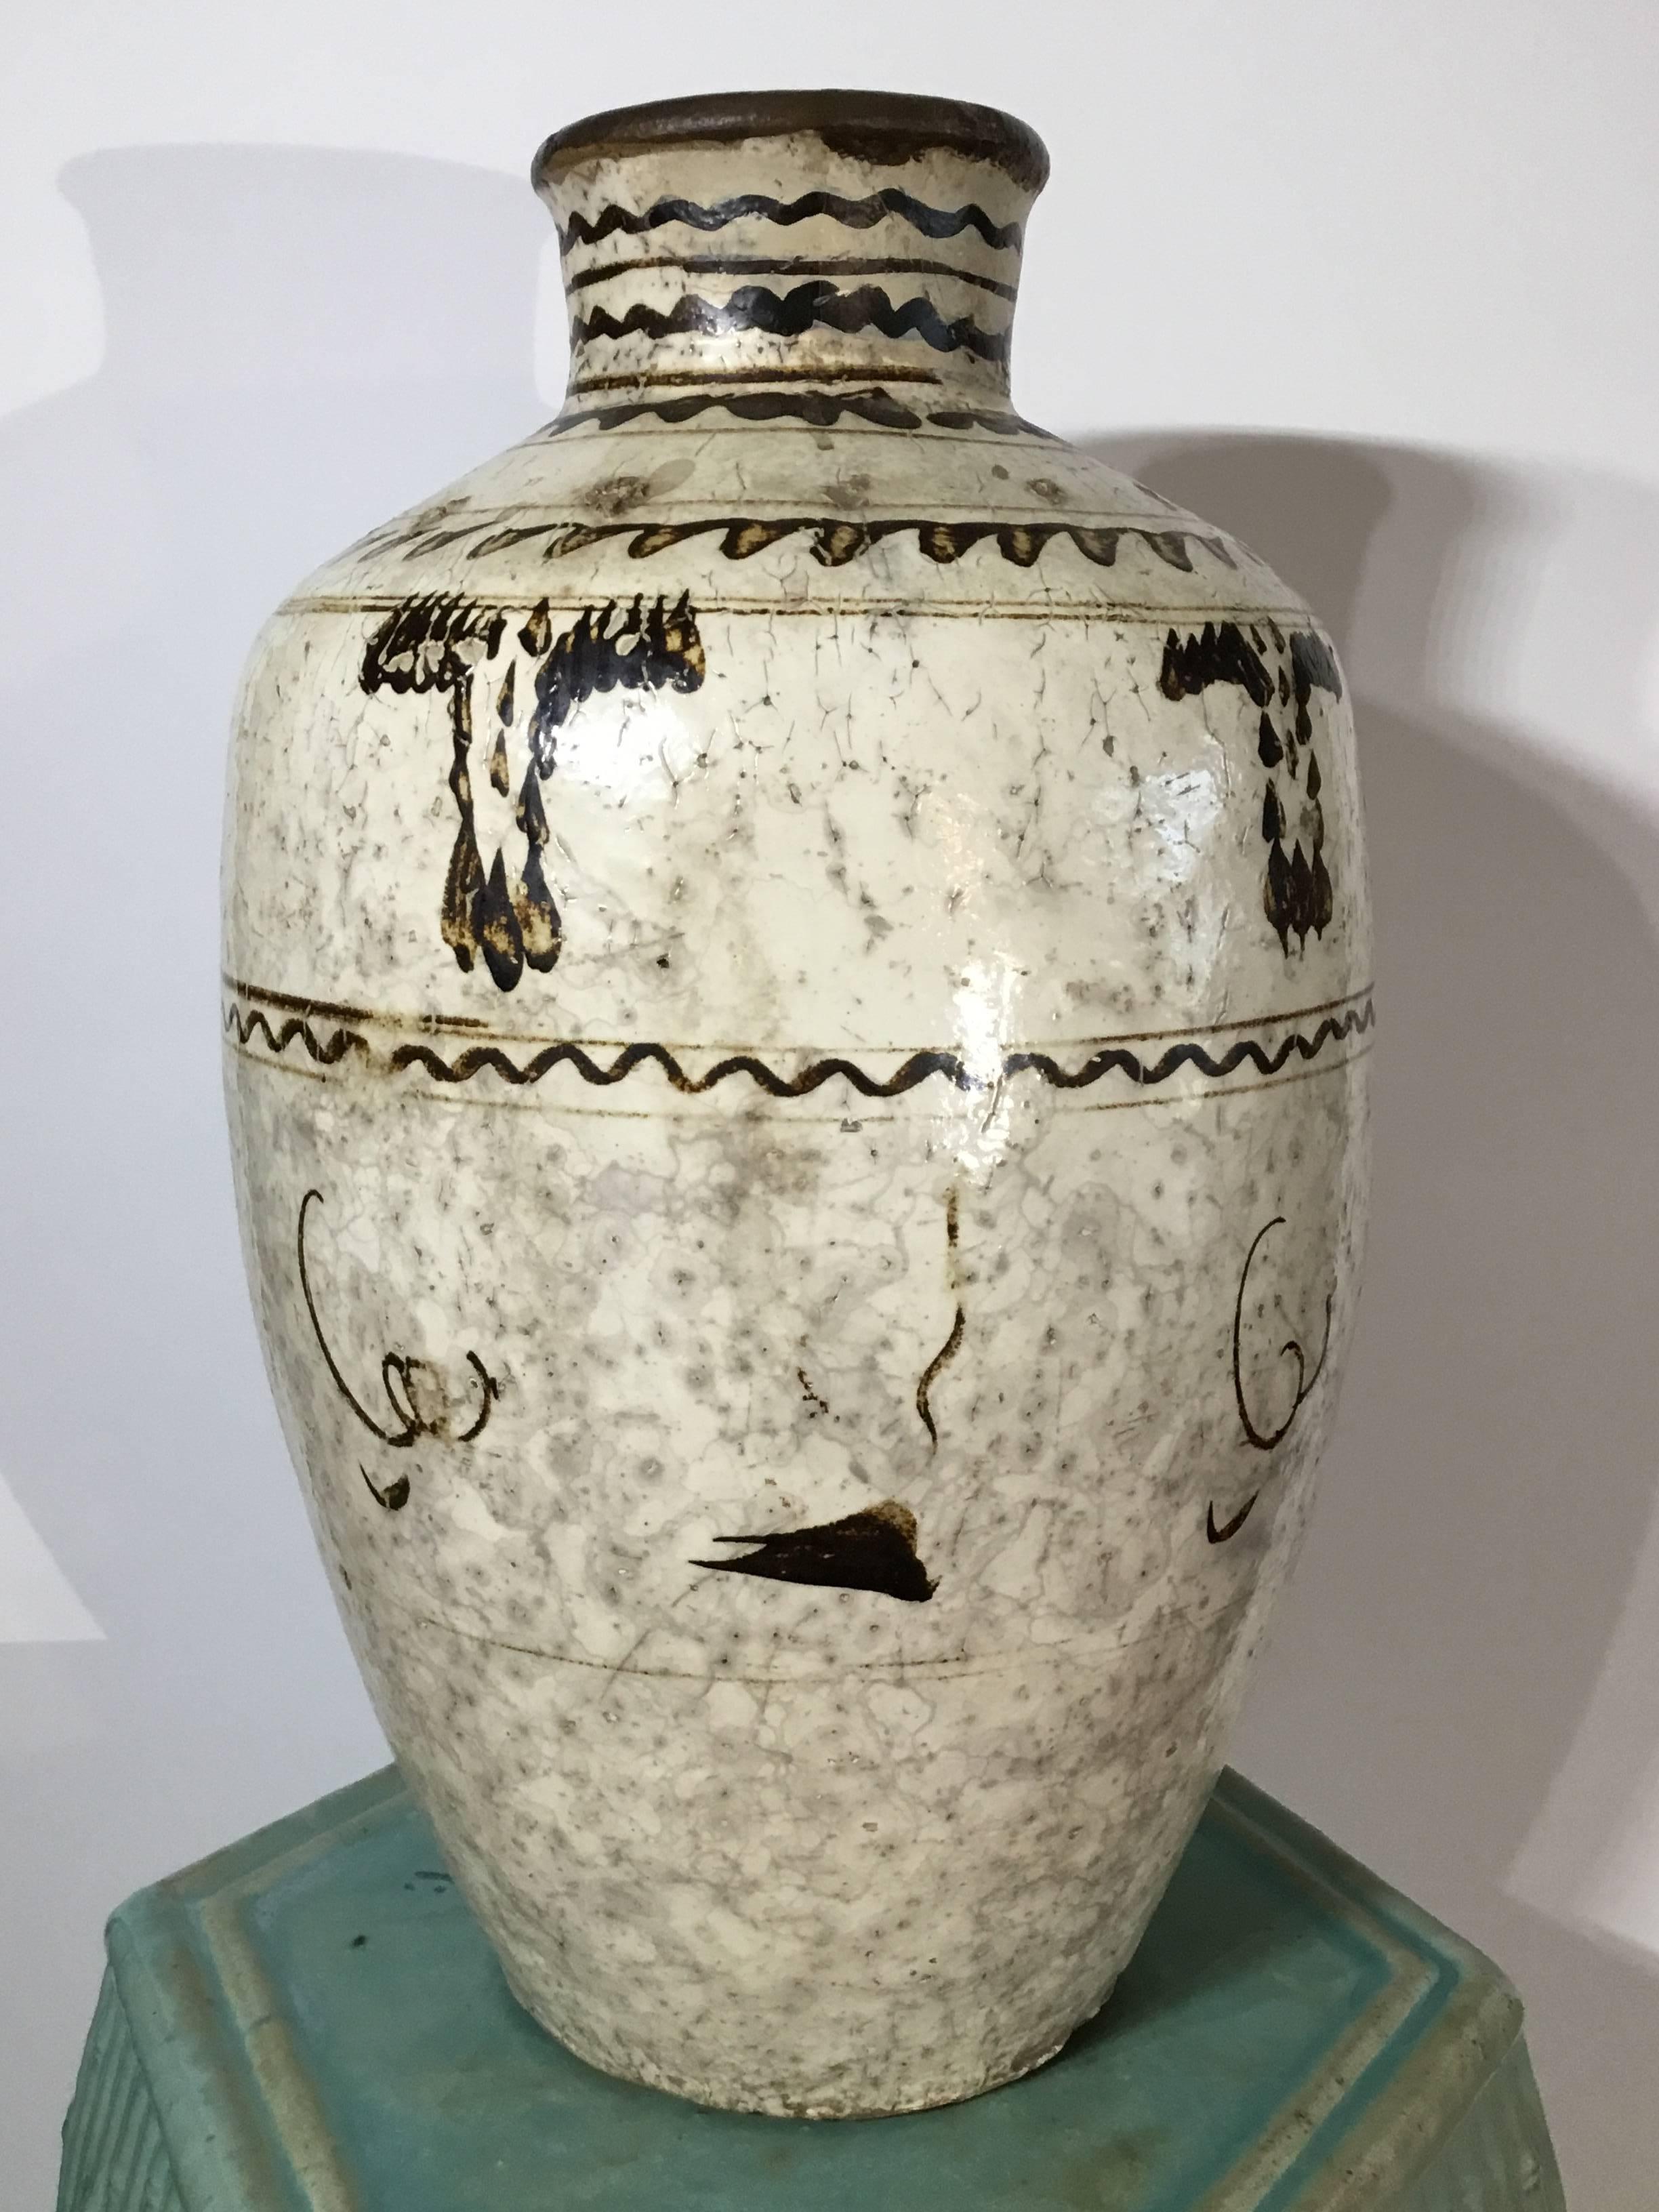 Beautiful stoneware Chinese jar, hand-painted and glazed, decorated
with Chinese motifs or calligraphy like, to make exceptional object of art.
Two more available.